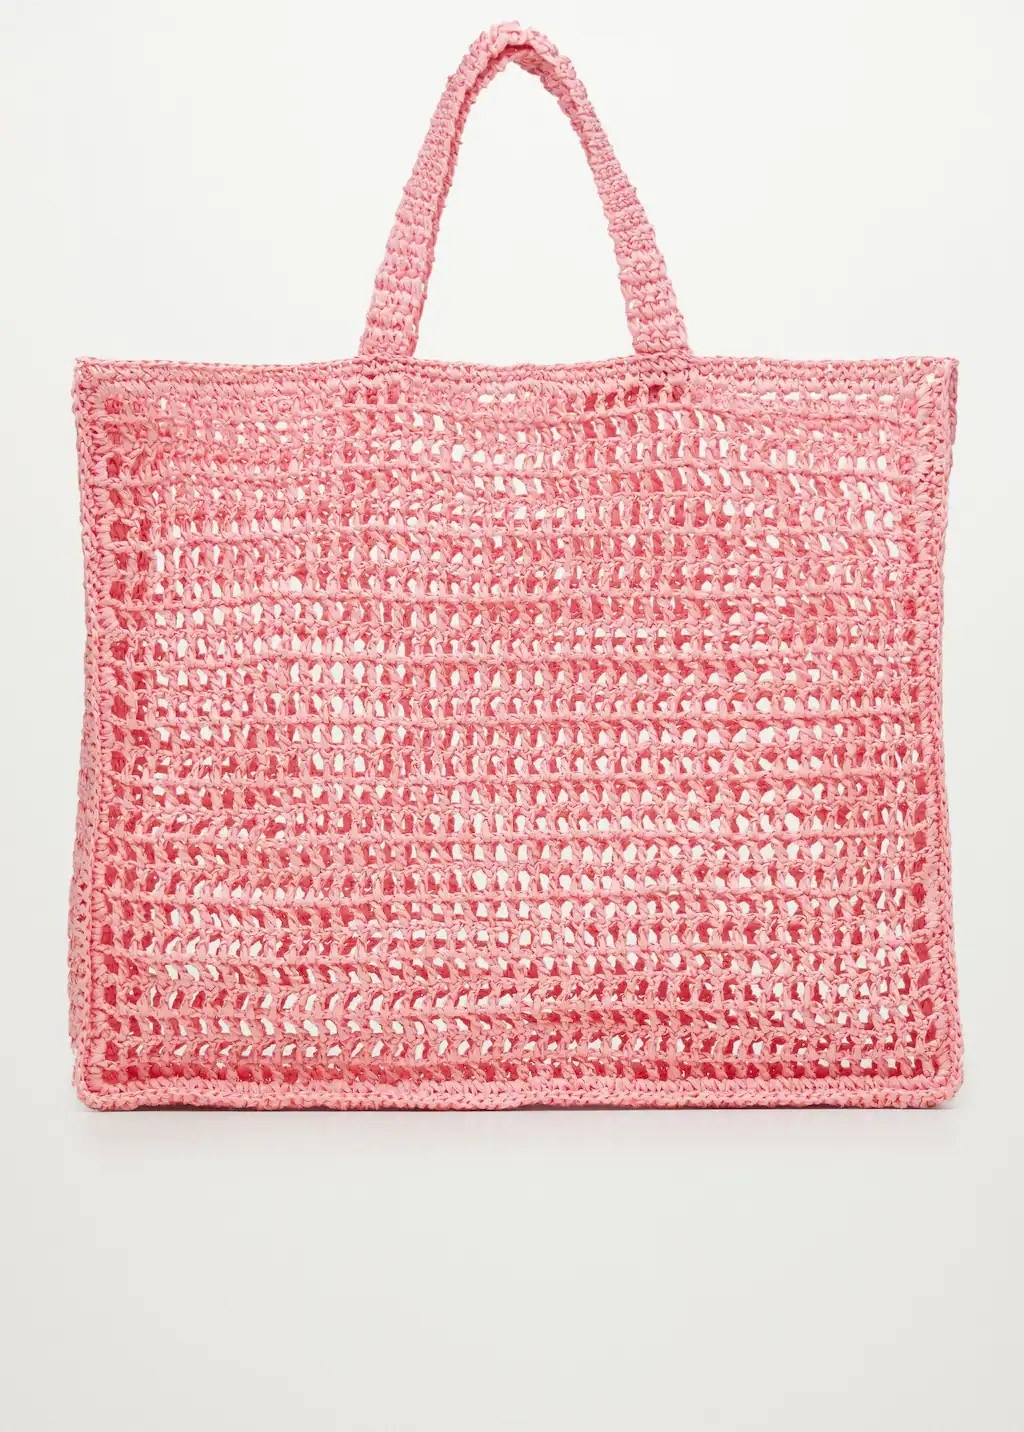 Mango square shaped tote in pink